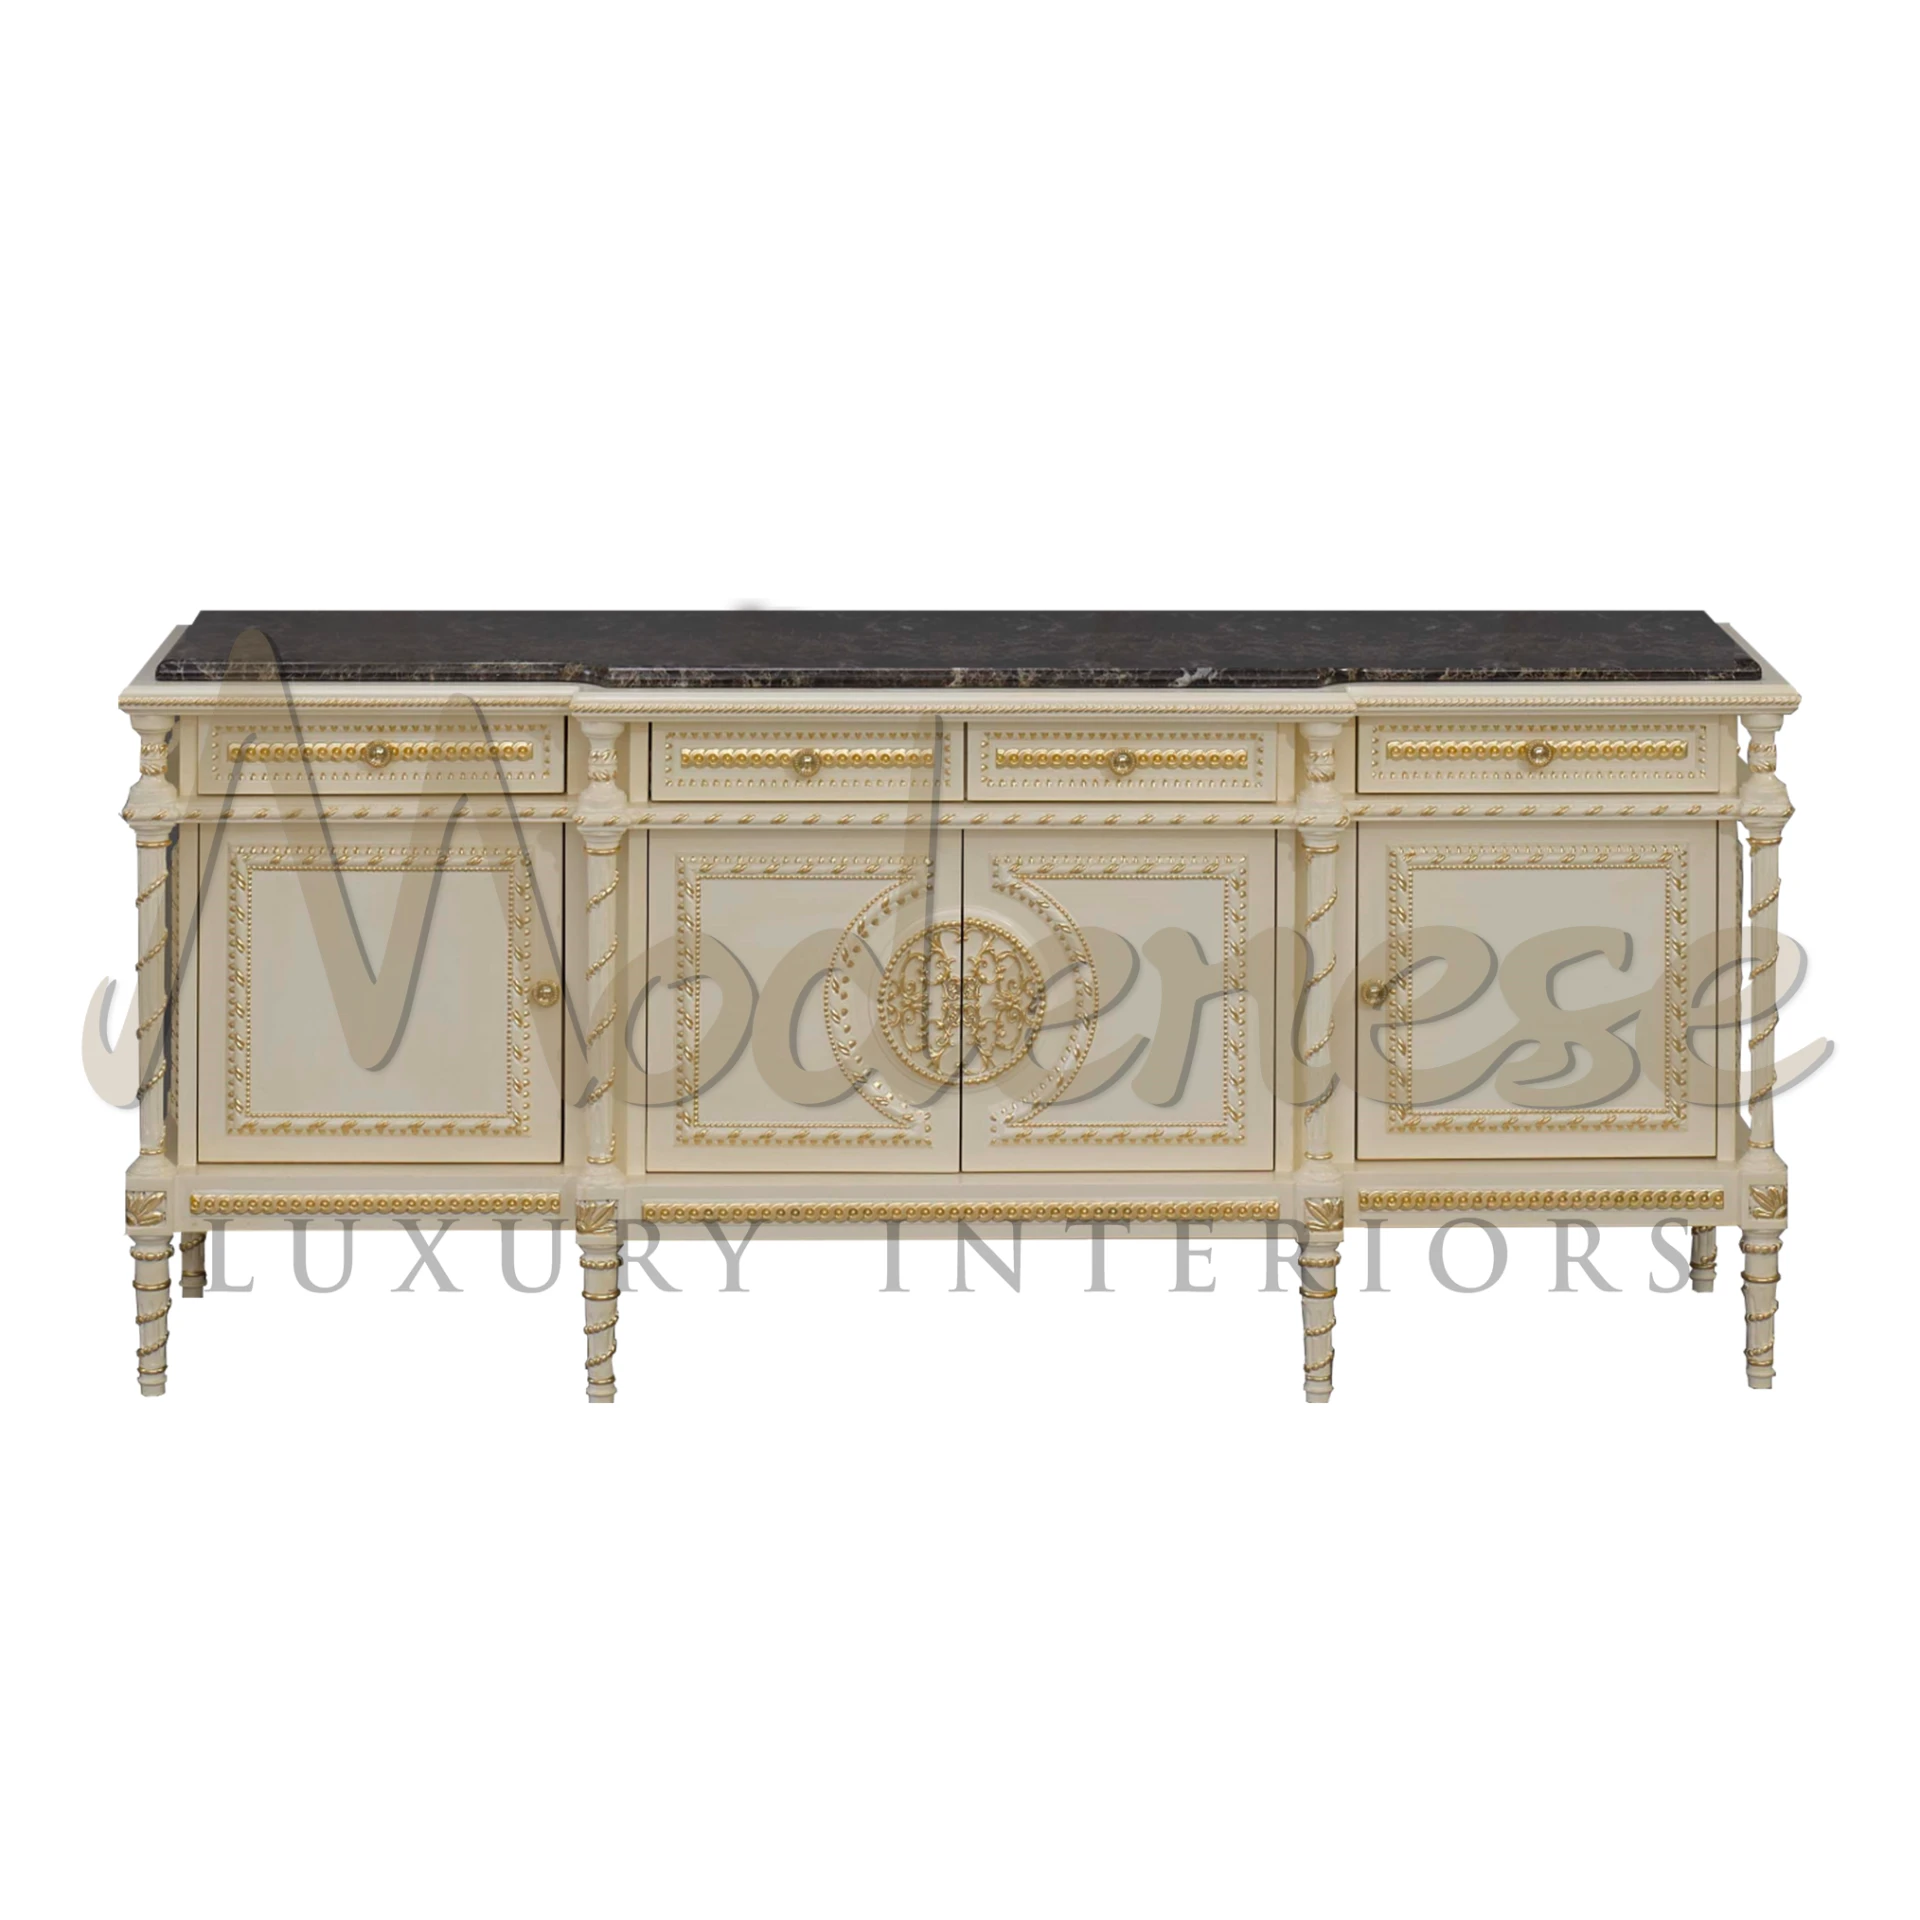 Luxury Italian Baroque TV Stand, ivory finish with decorative carvings, showcasing classic interior design and elegance.
